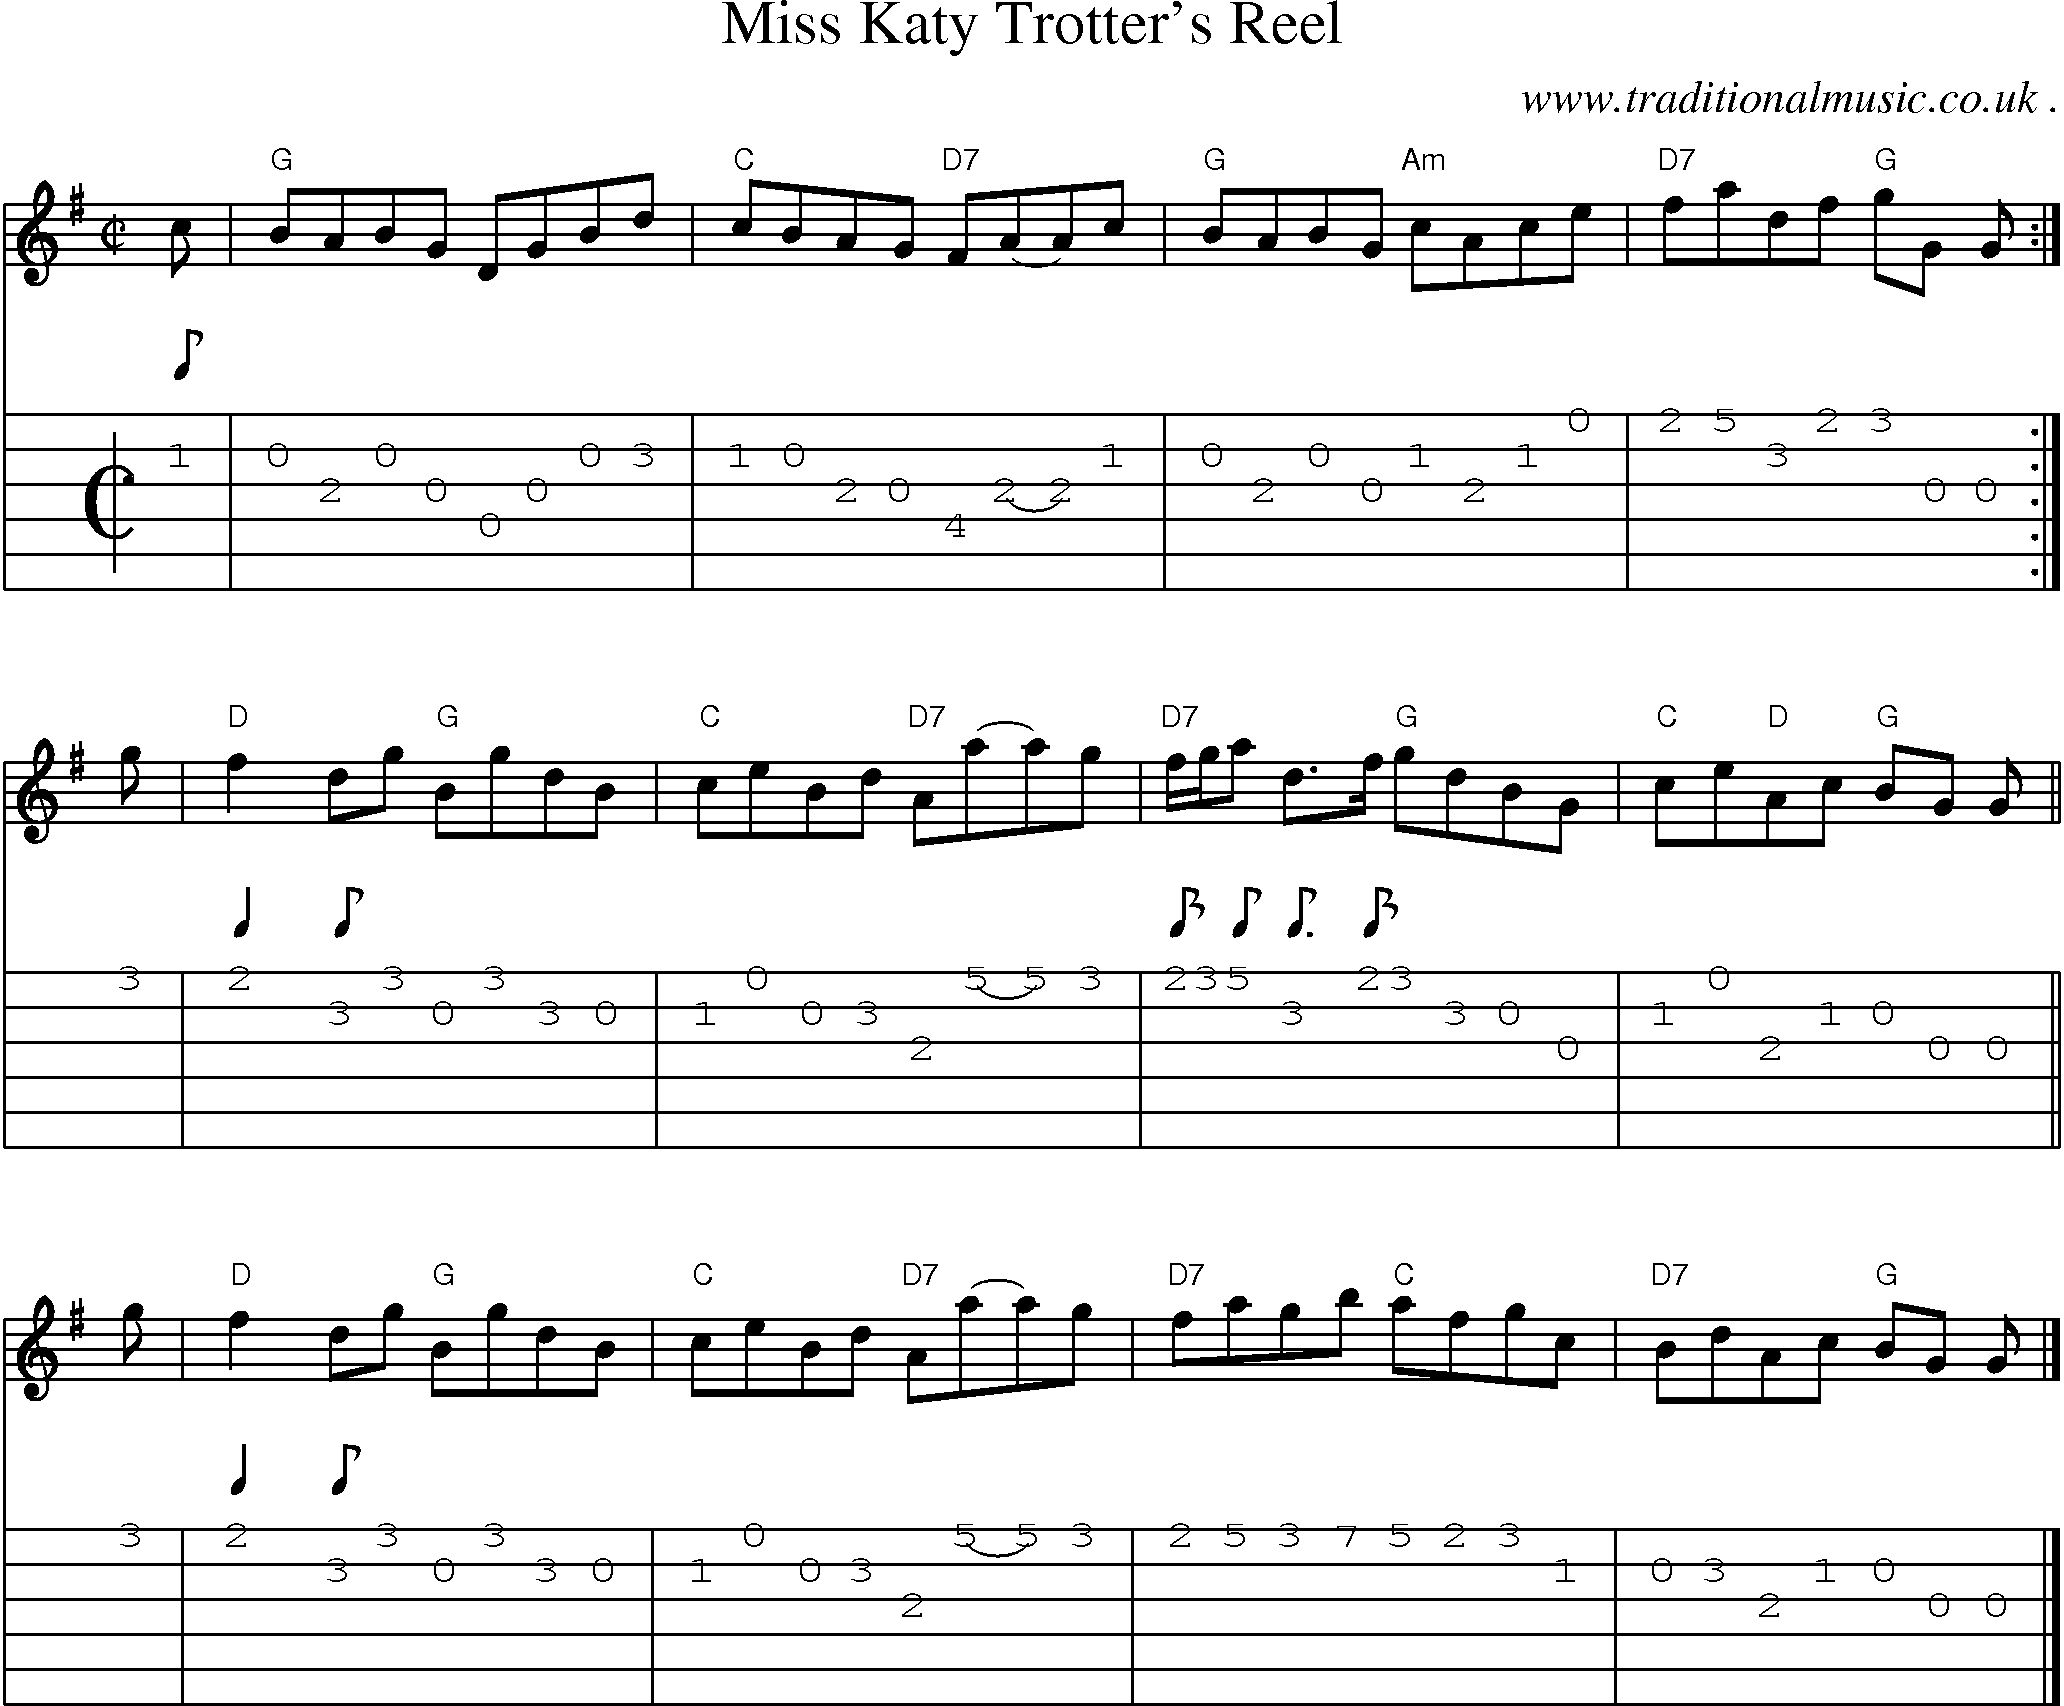 Sheet-music  score, Chords and Guitar Tabs for Miss Katy Trotters Reel